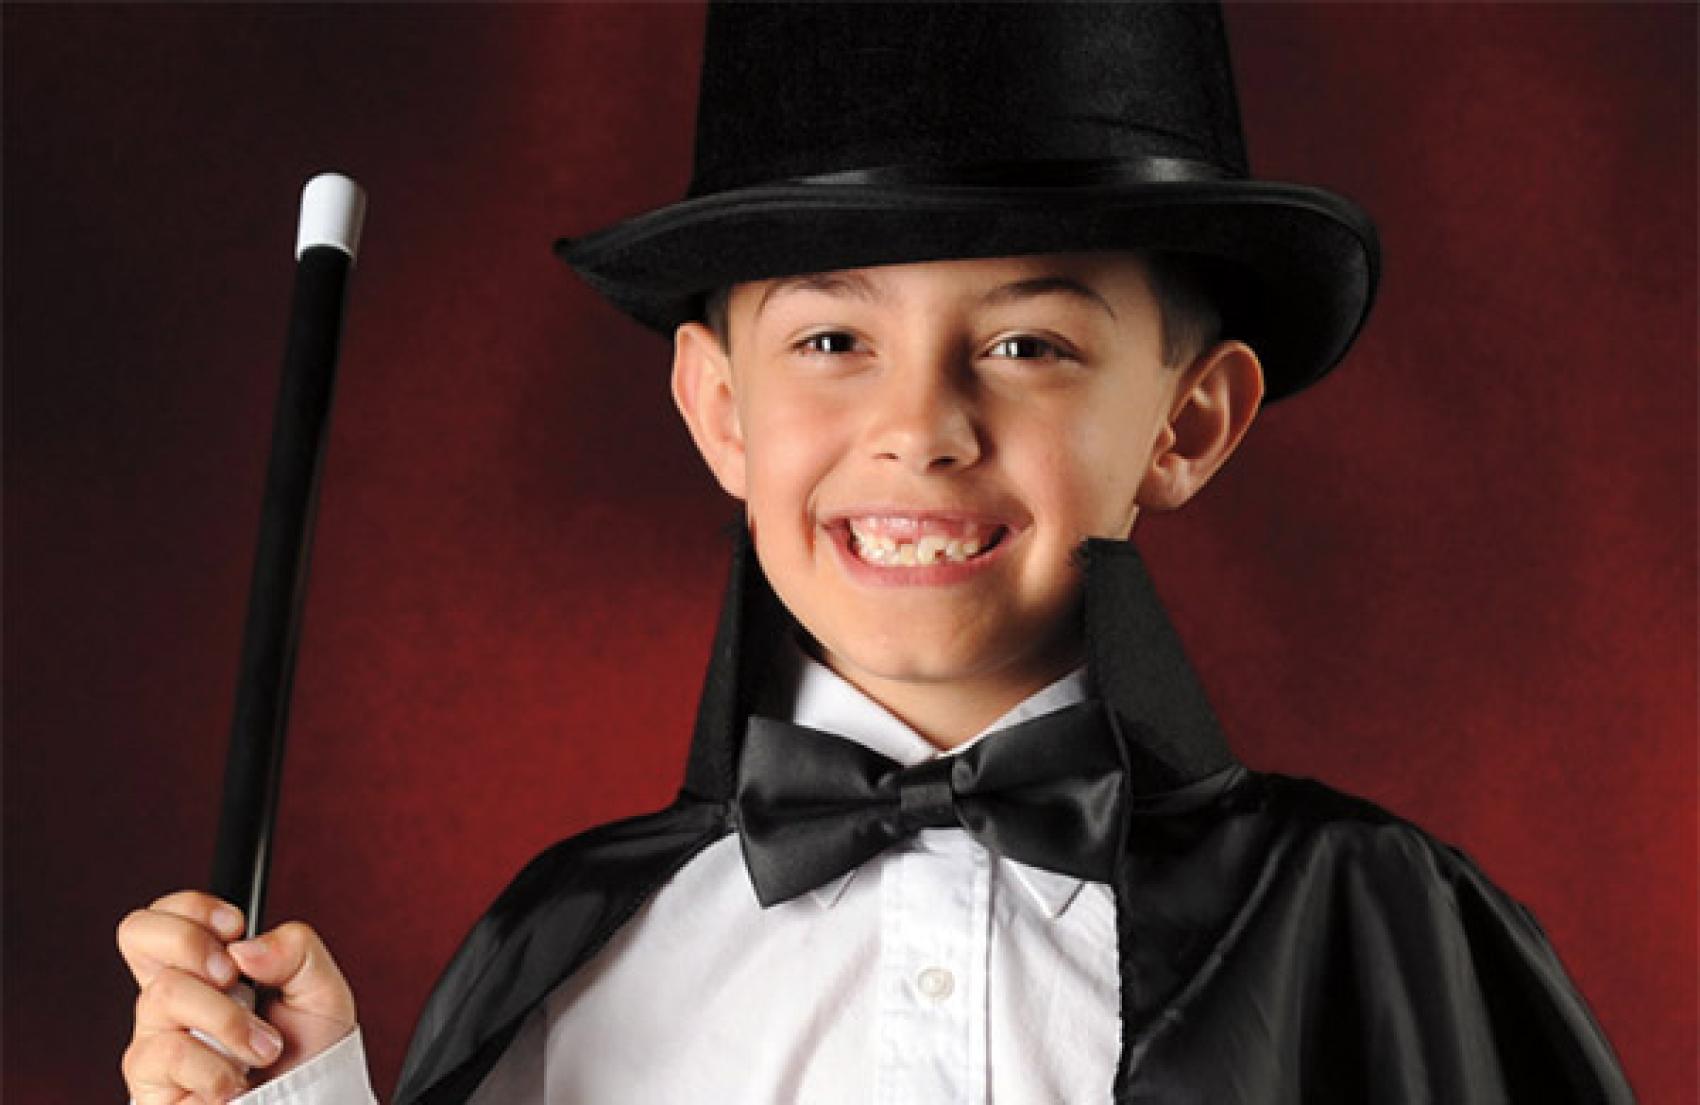 Kids dressed up as a magician